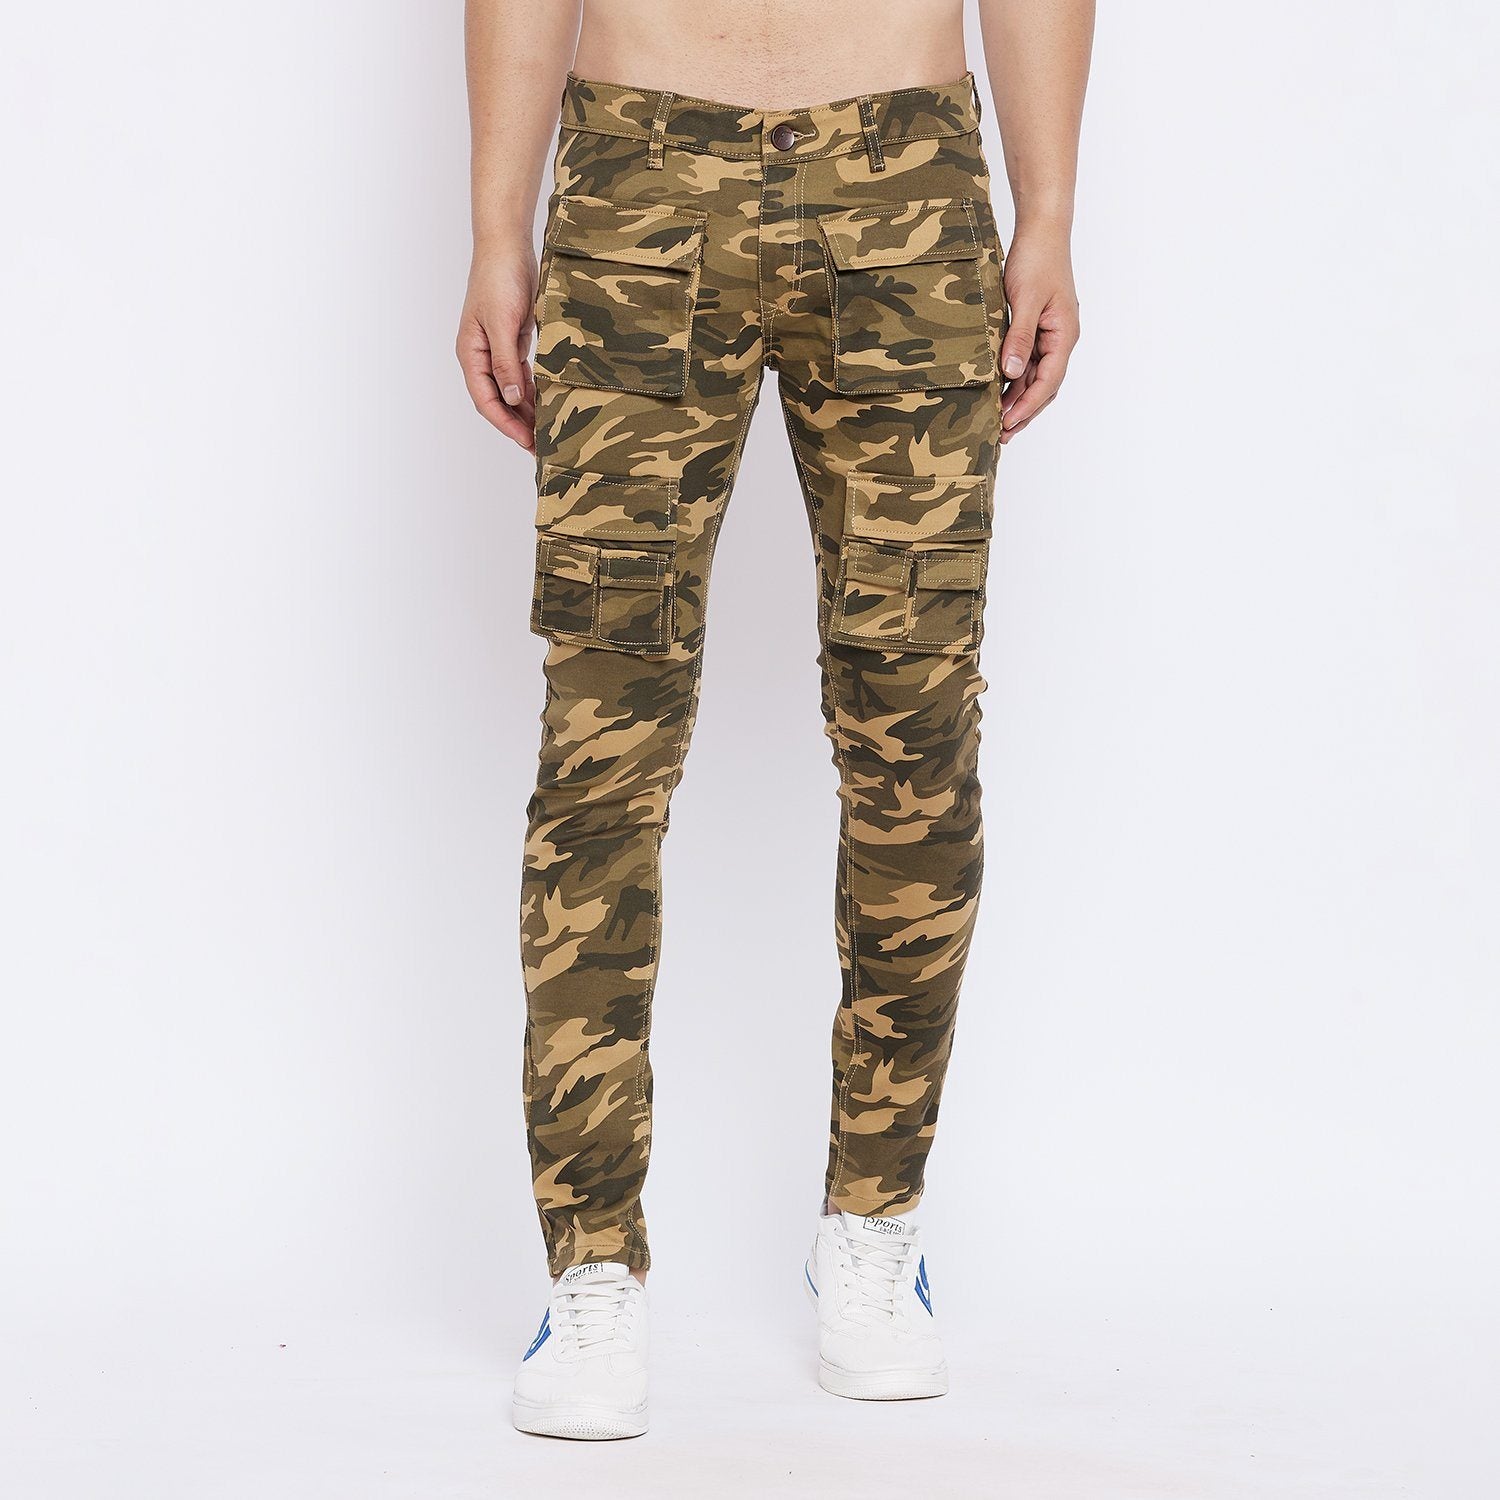 Men's Cargo Pants Casual Camouflage Army Hip Hop Ankle Zipper | Mens  fashion jeans, Hipster mens fashion, Sneakers men fashion